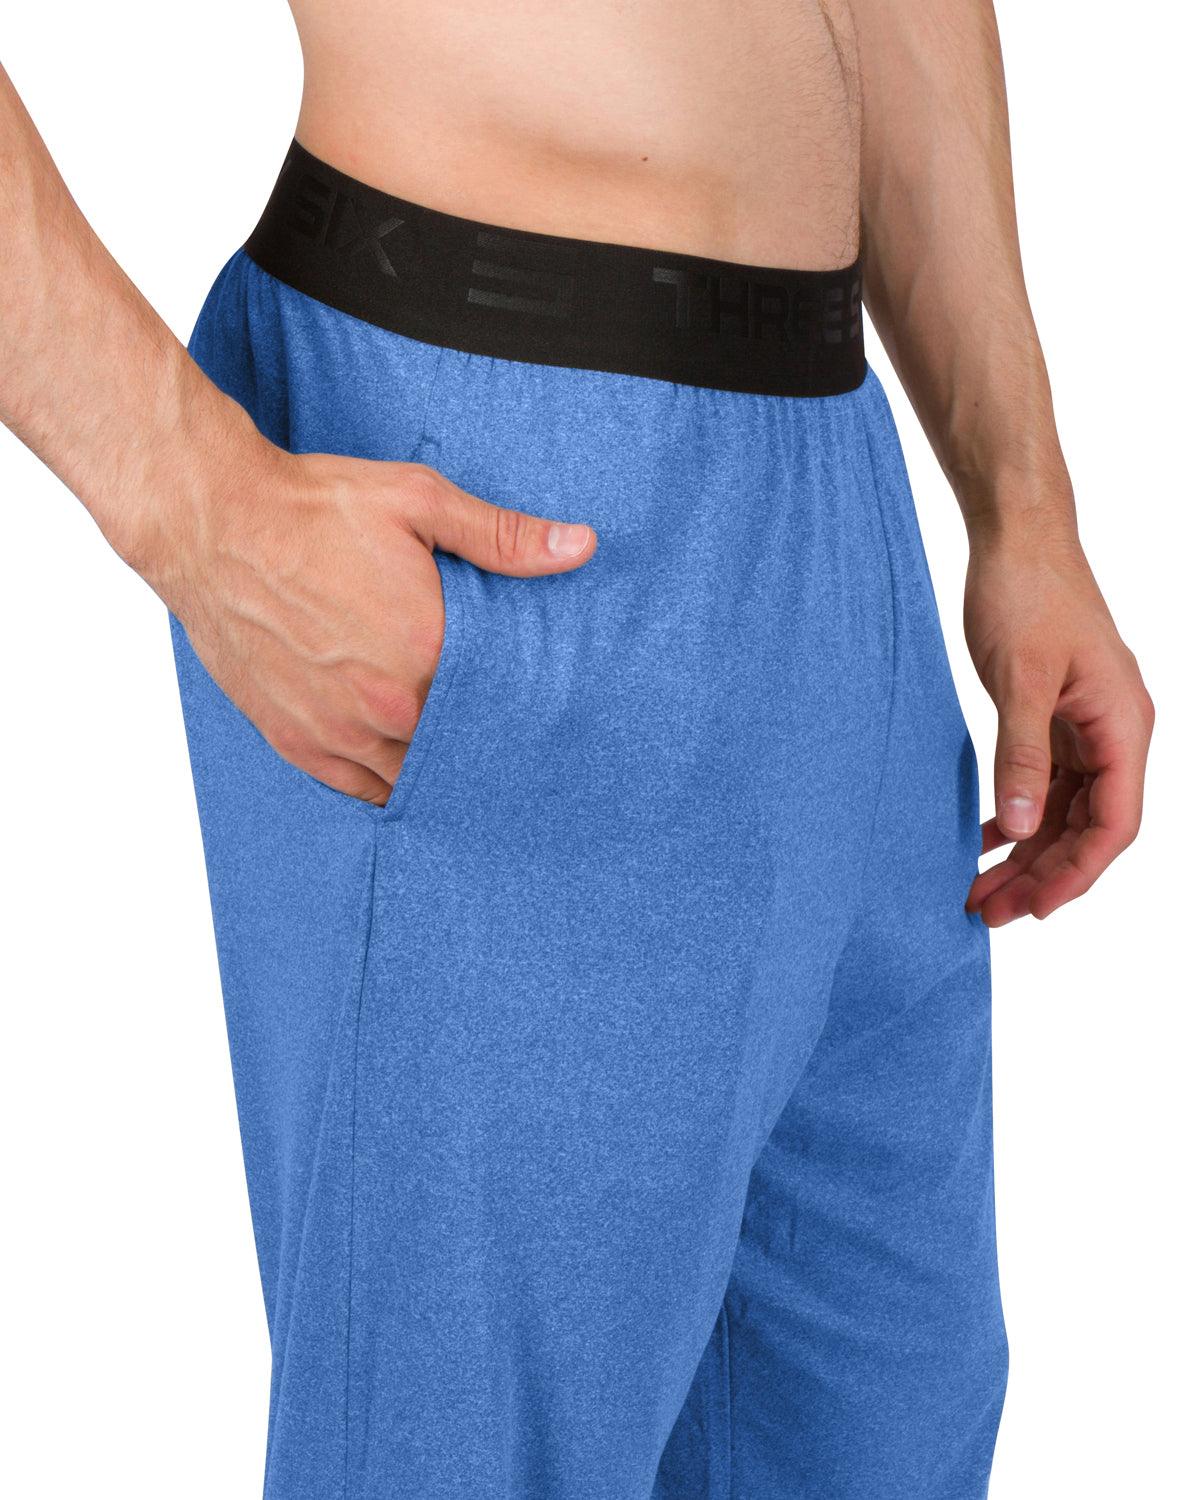 Performance Dry Fit Pajama Pants for Men - Stretch Lounge Pjs with Poc